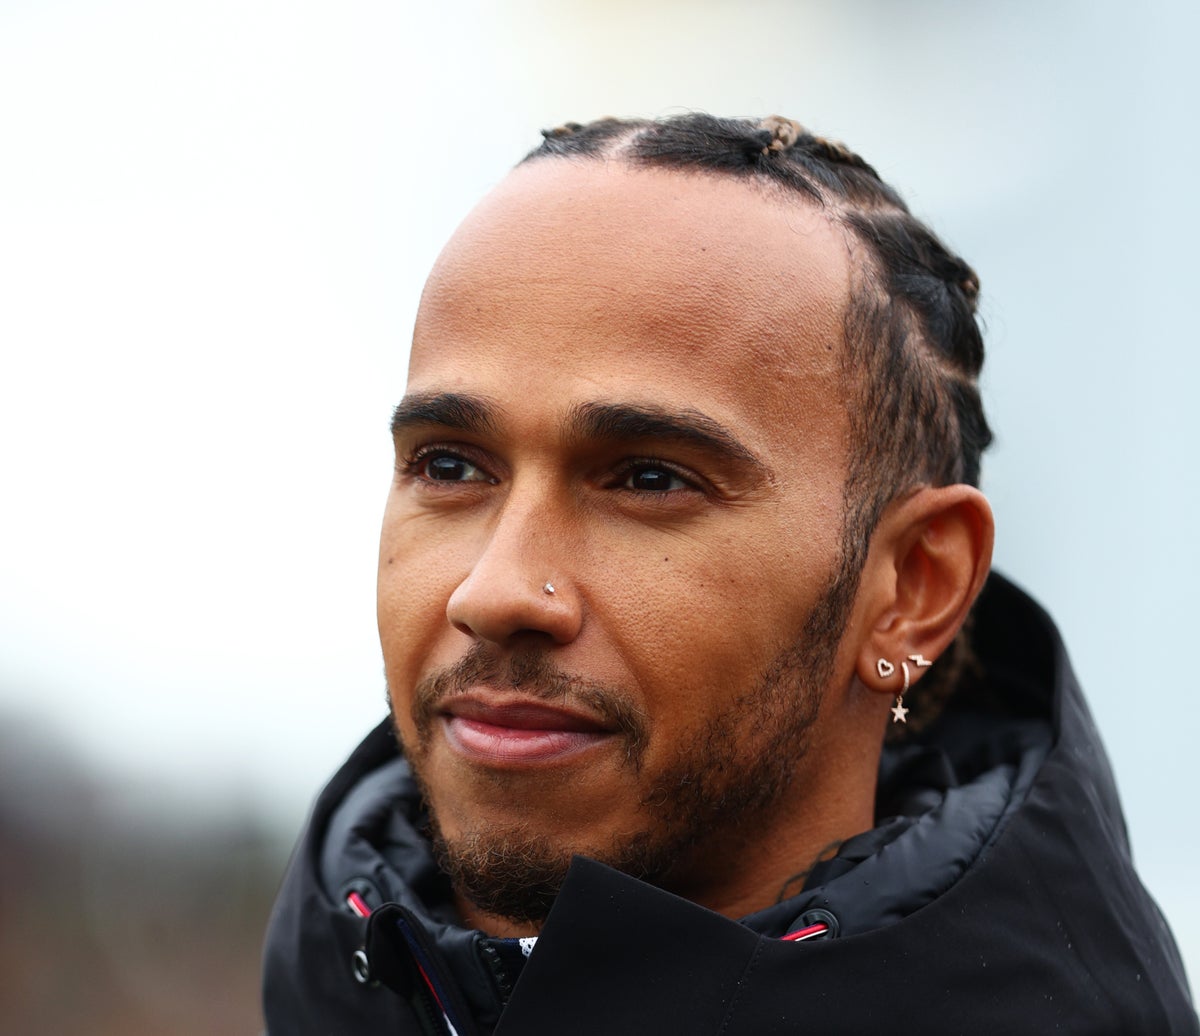 Lewis Hamilton admits he is ‘gutted’ with qualifying in fifth for British Grand Prix 